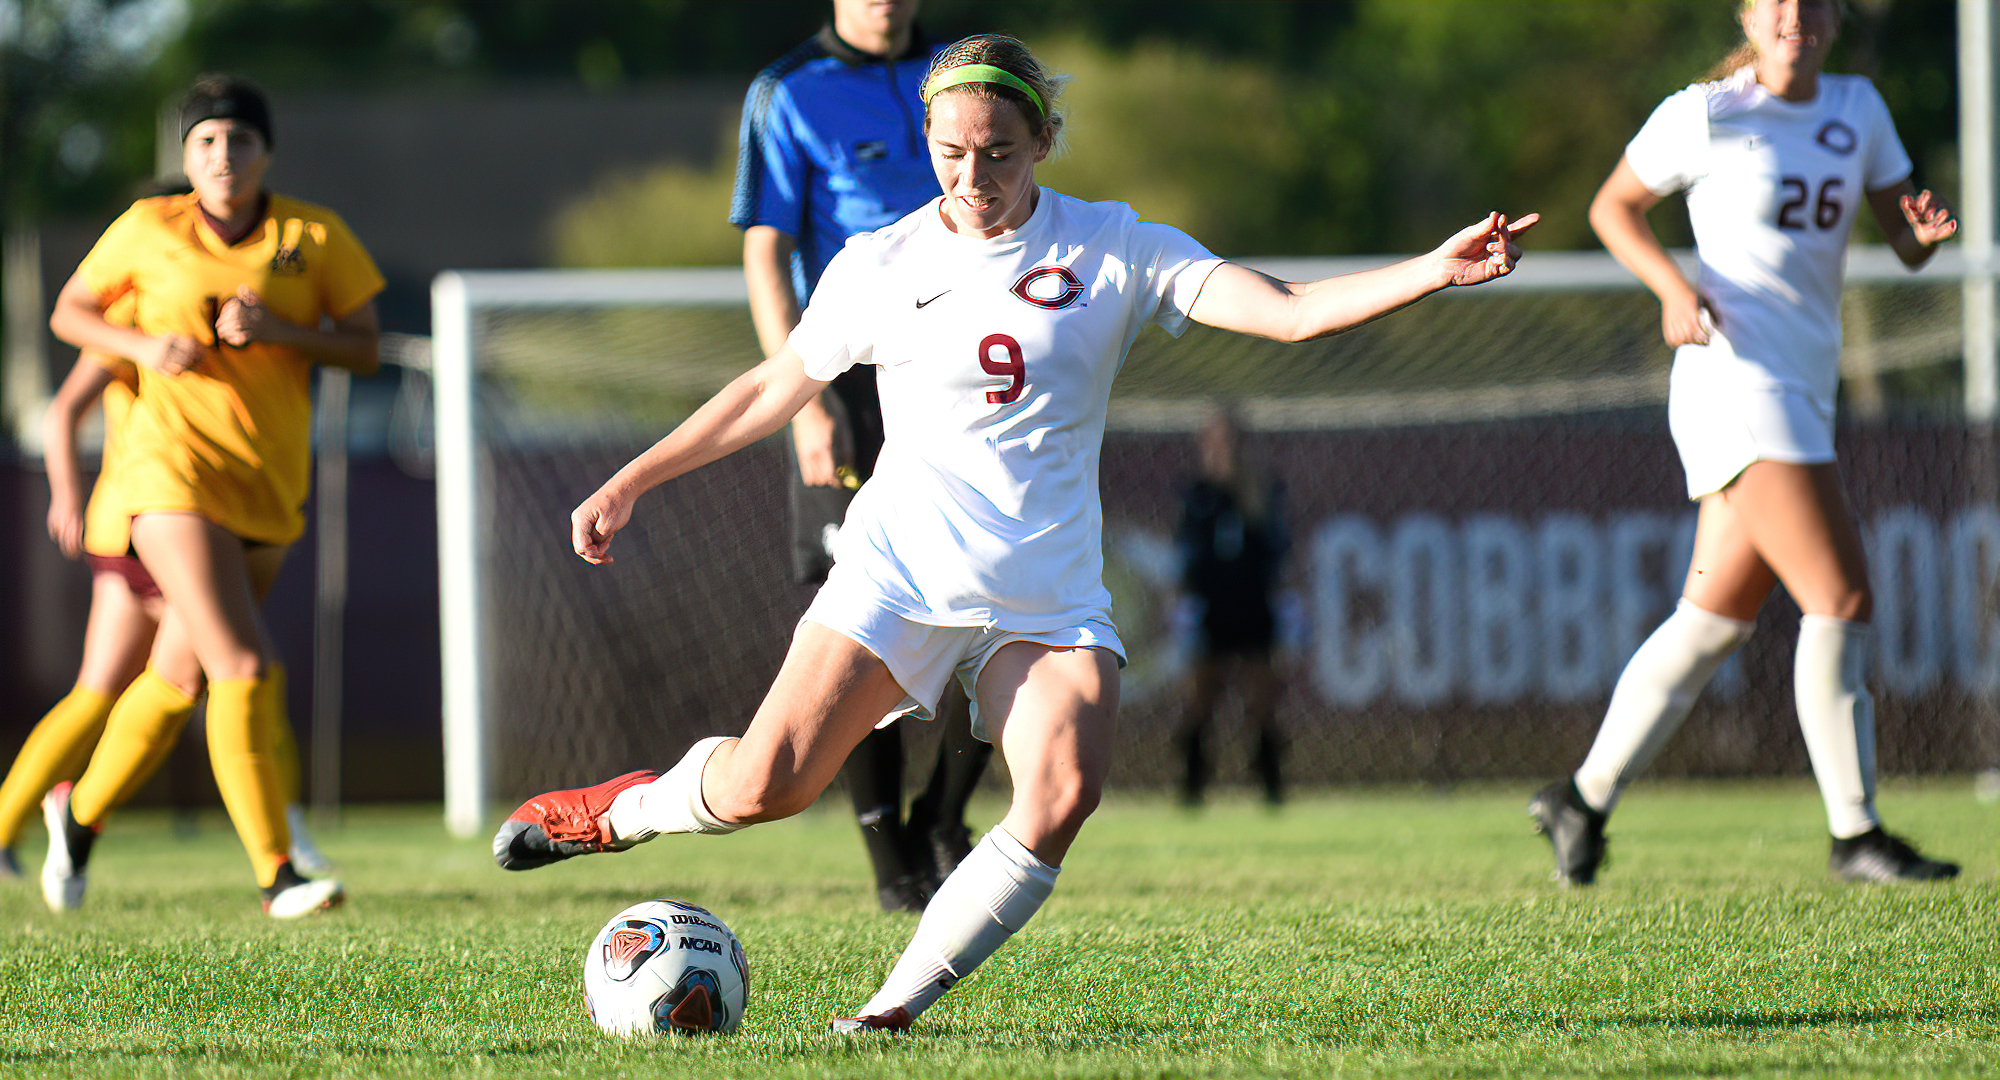 Senior Grace Lawlor scored three goals to help Concordia roll past Minn.-Morris 7-2. The Cobbers have now won two straight games.